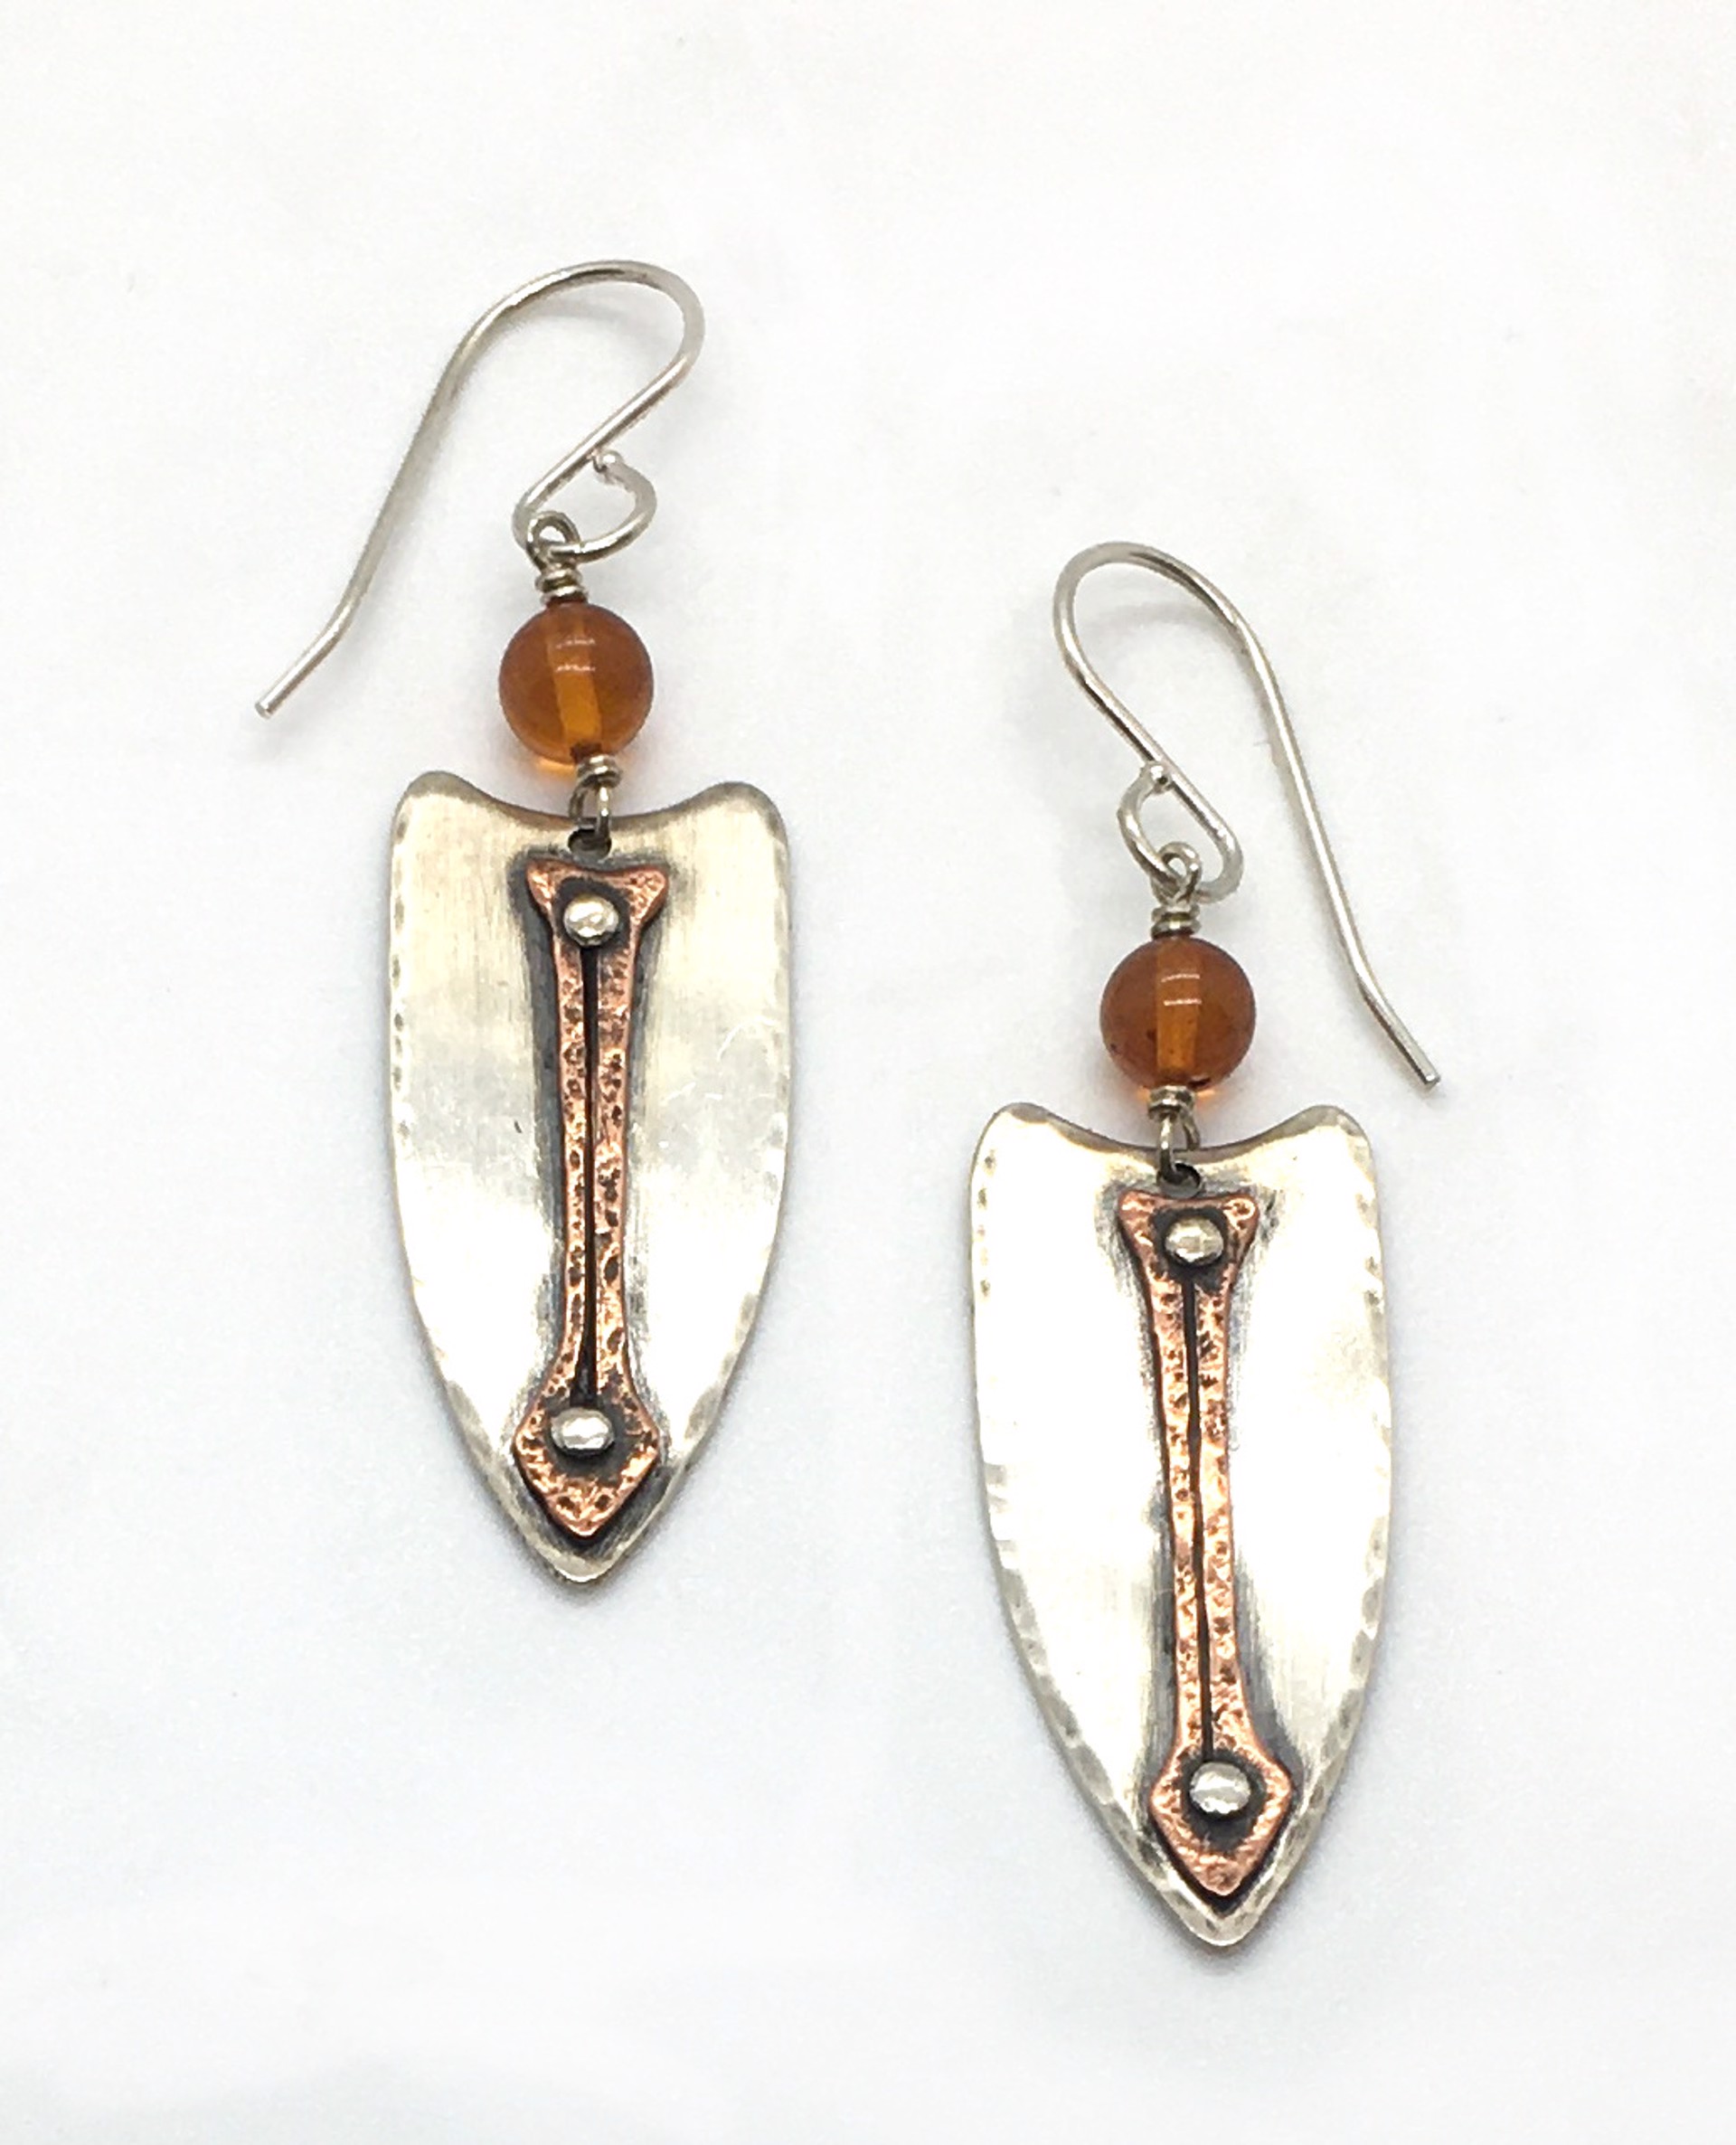 Silver and Copper Riveted Baltic Amber Earrings by Grace Ashford